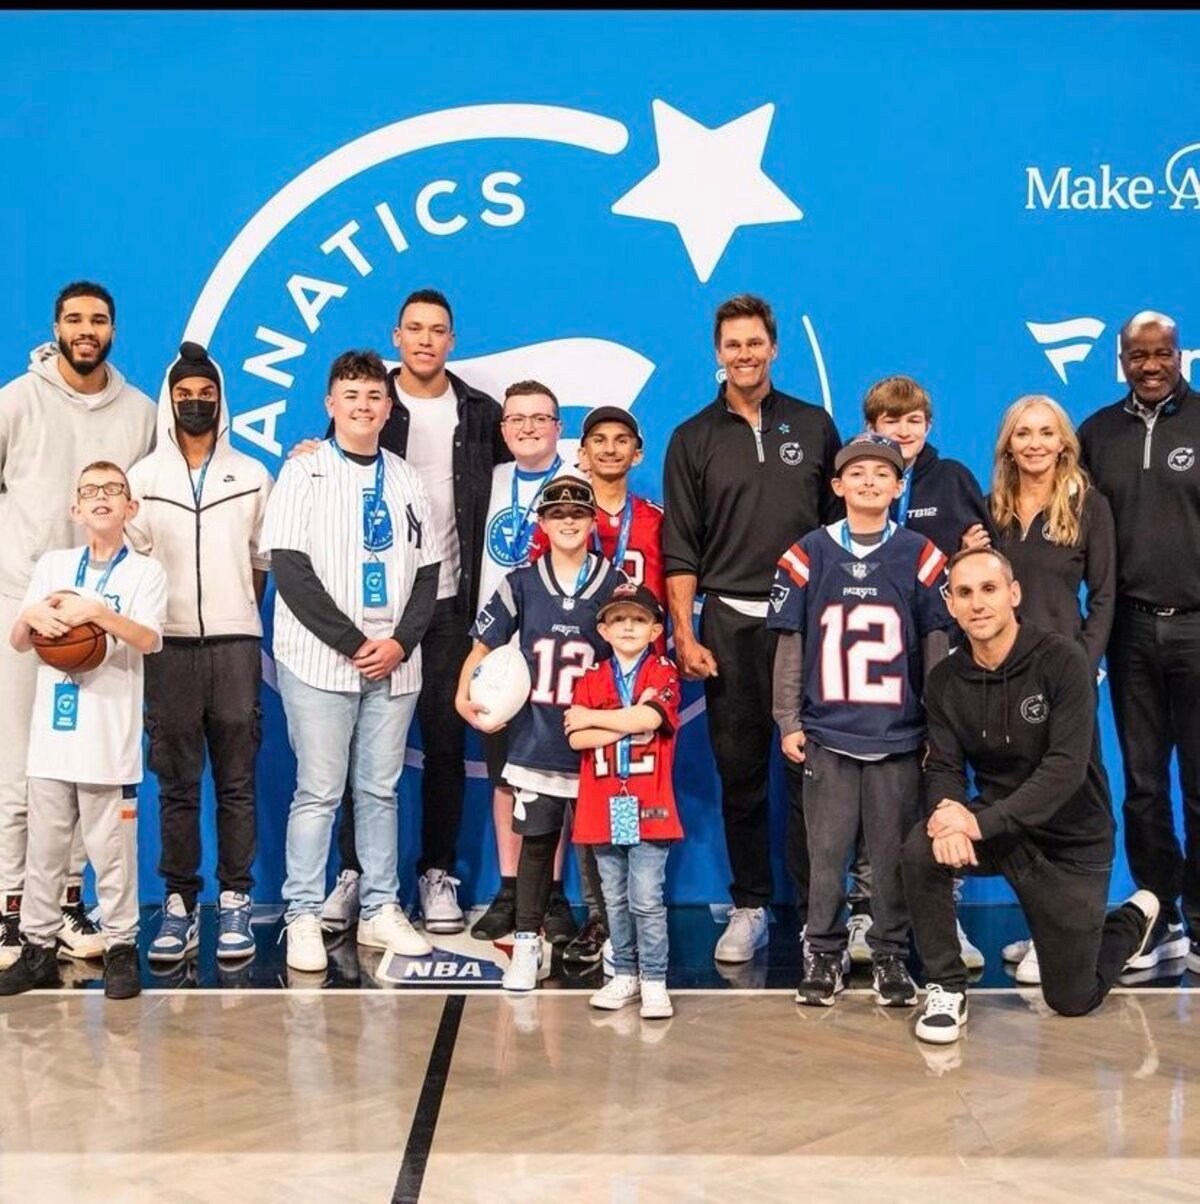 Yankees star Aaron Judge together with Tom Brady and Jayson Tatum team up with Fanatics and Make-A-Wish for a big surprise to kids in New York City on October 25, 2023.